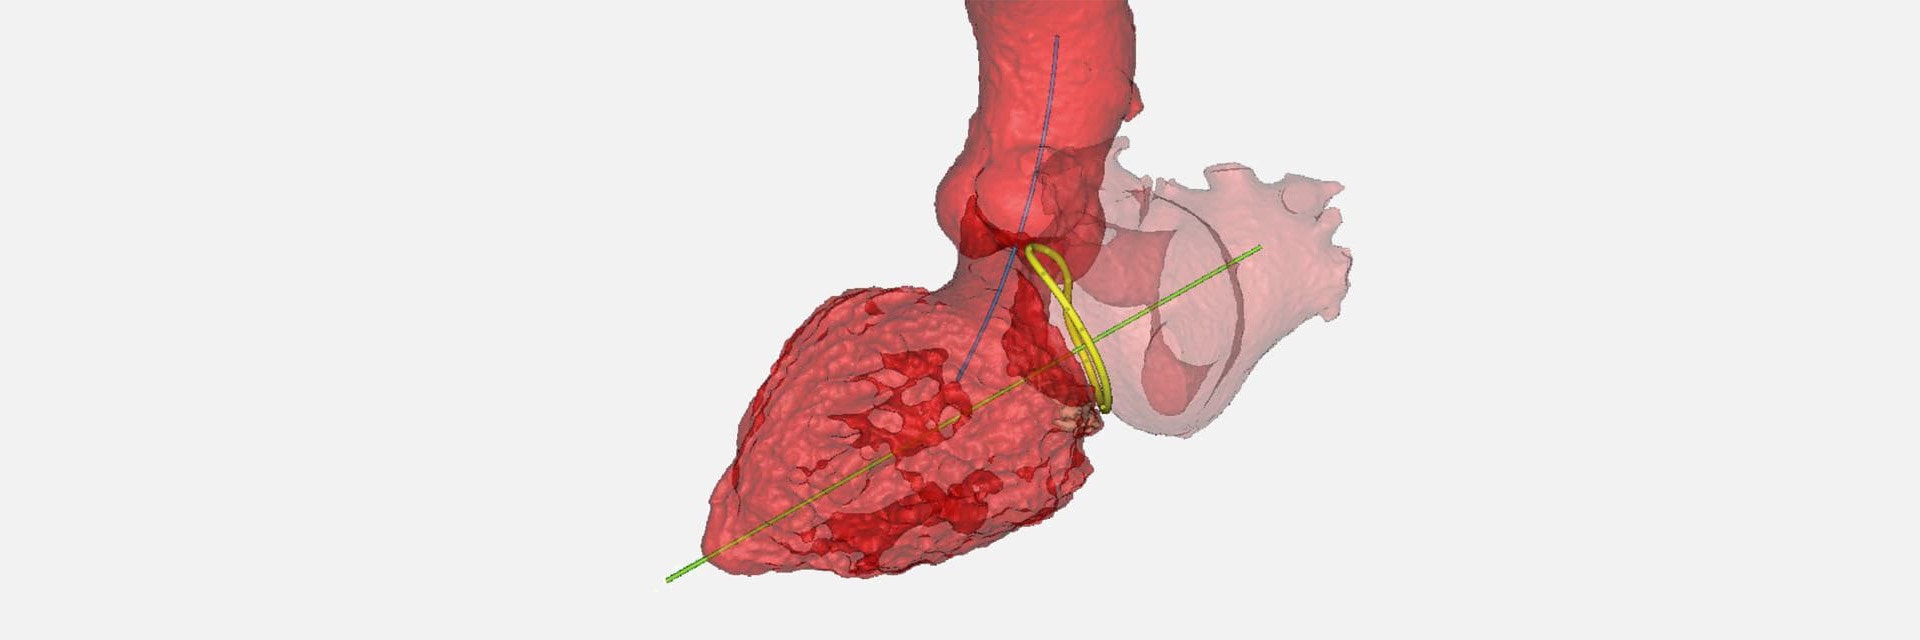 3D digital model of a heart with planning tools for surgery